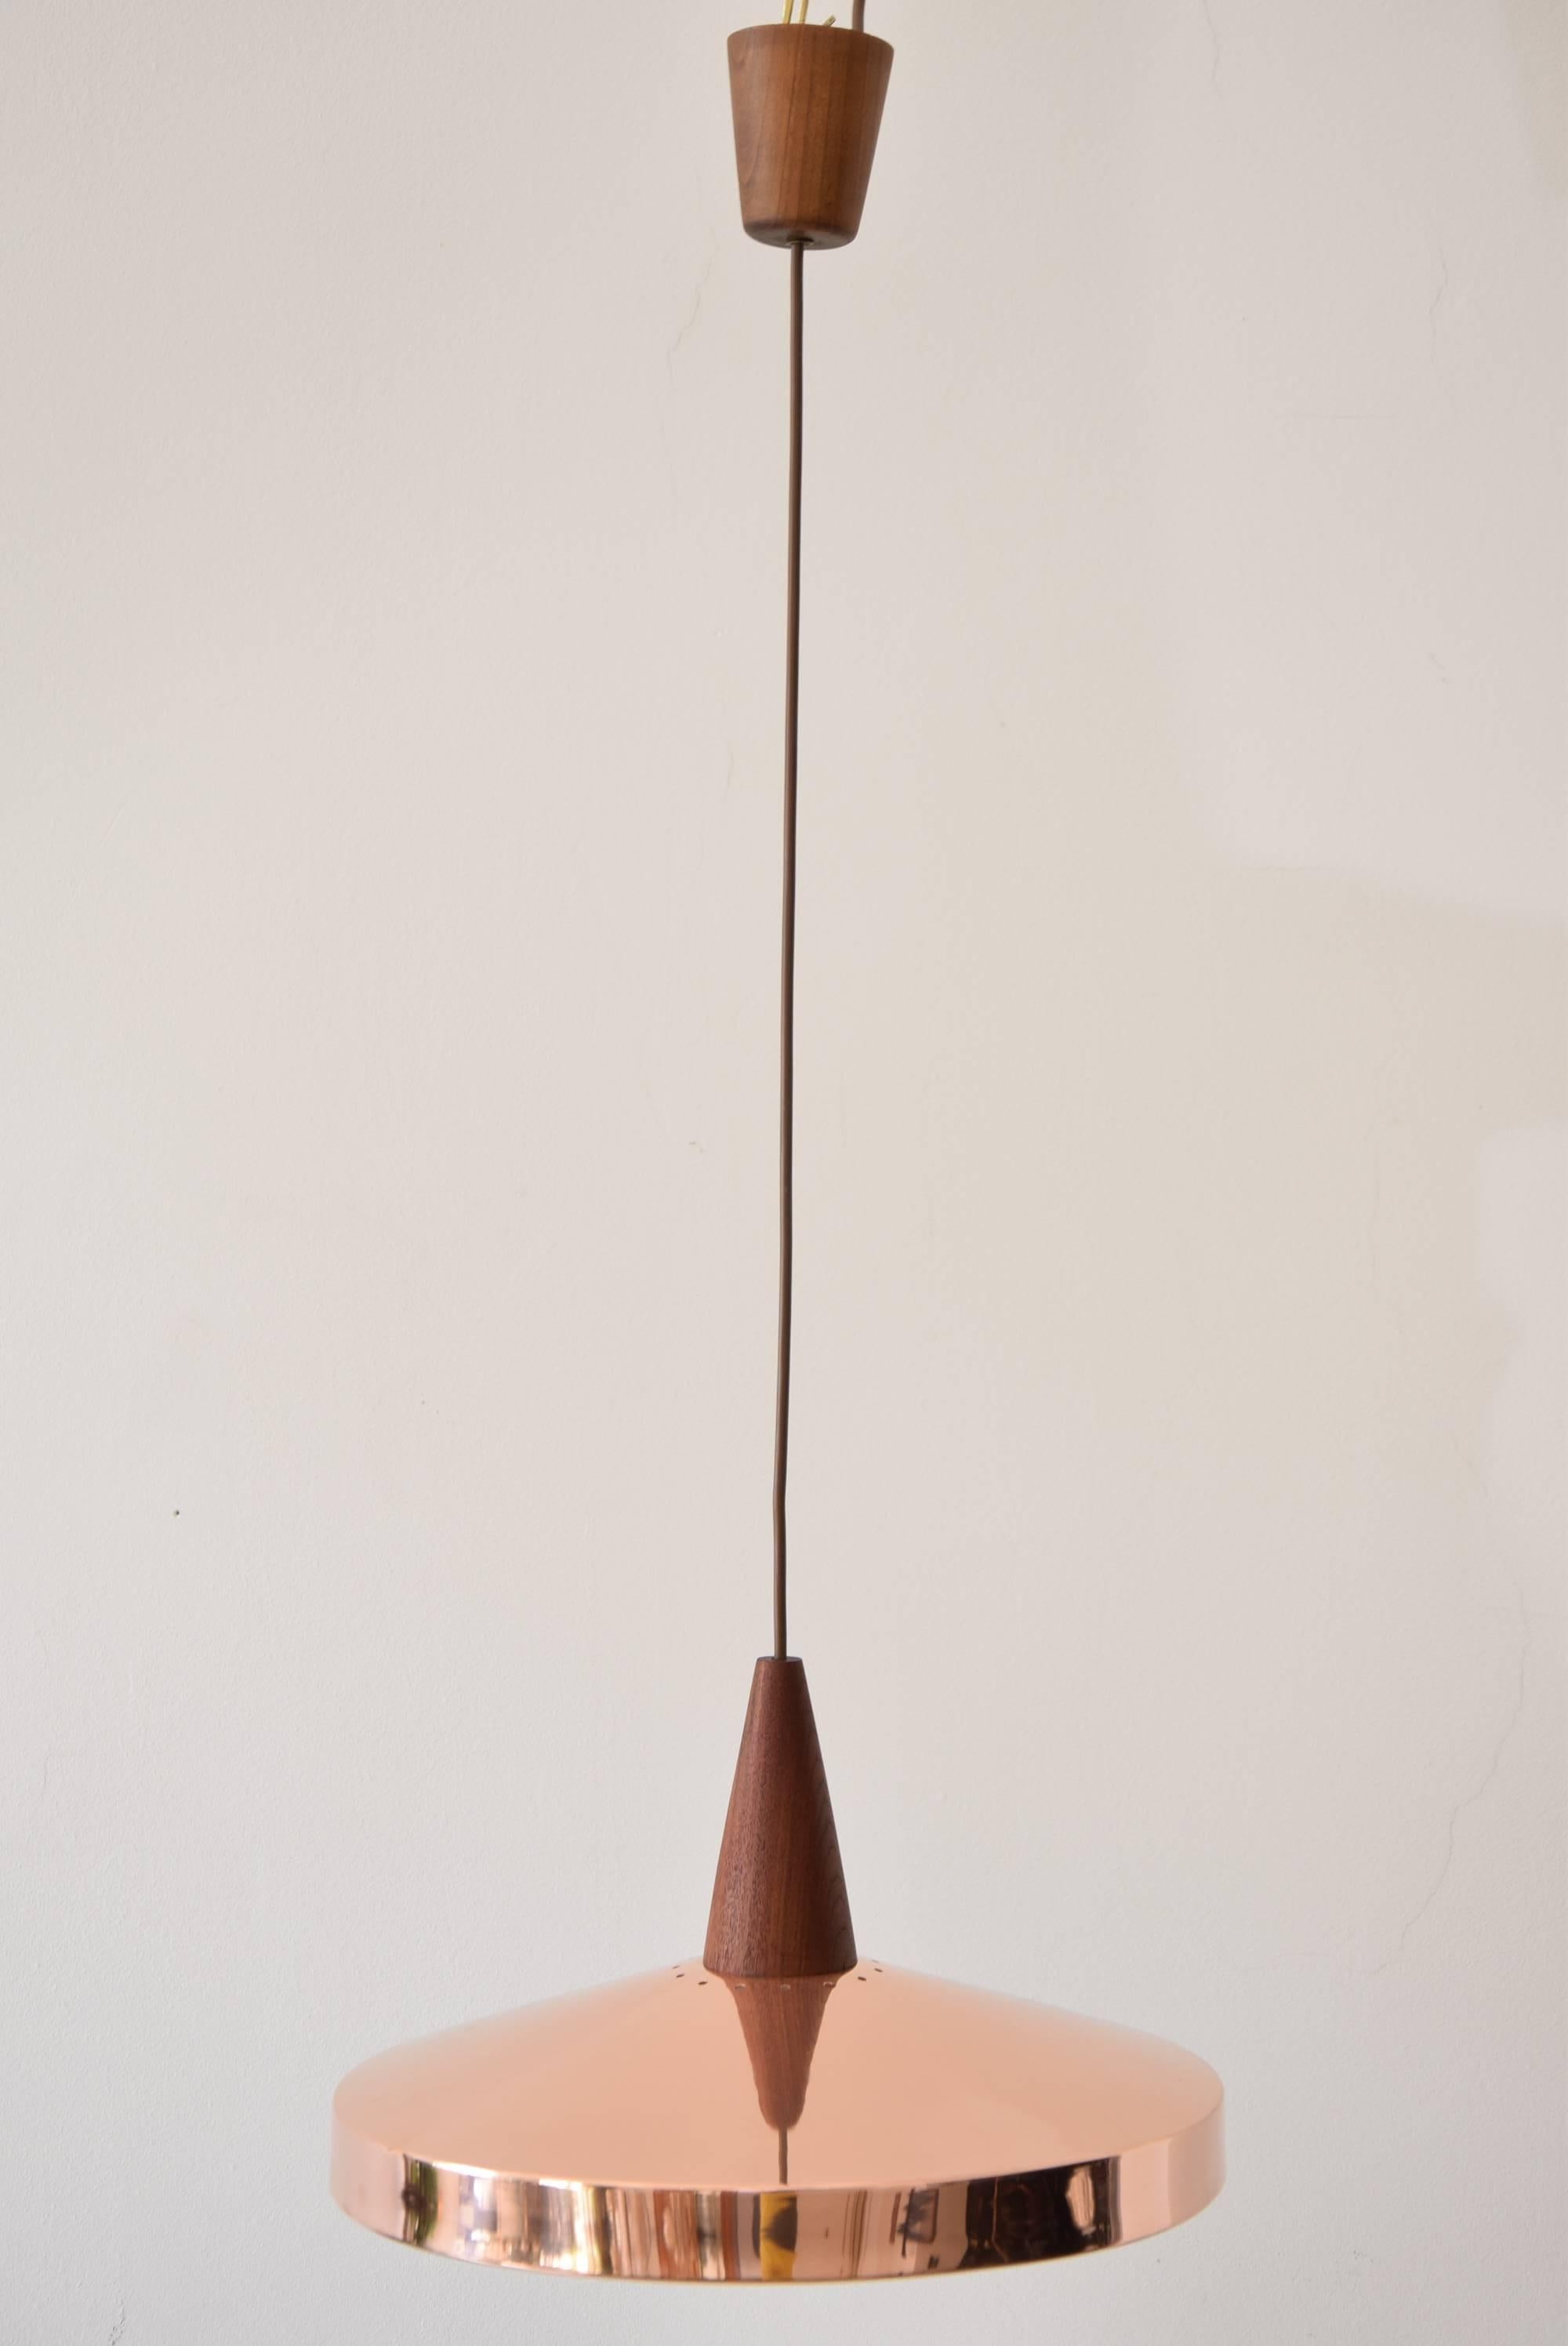 Elegant hanging lamp of copper and teak wood, circa 1960s.
Polished and stove enameled.
The height of the chandelier is easily adjustable to fit different rooms.